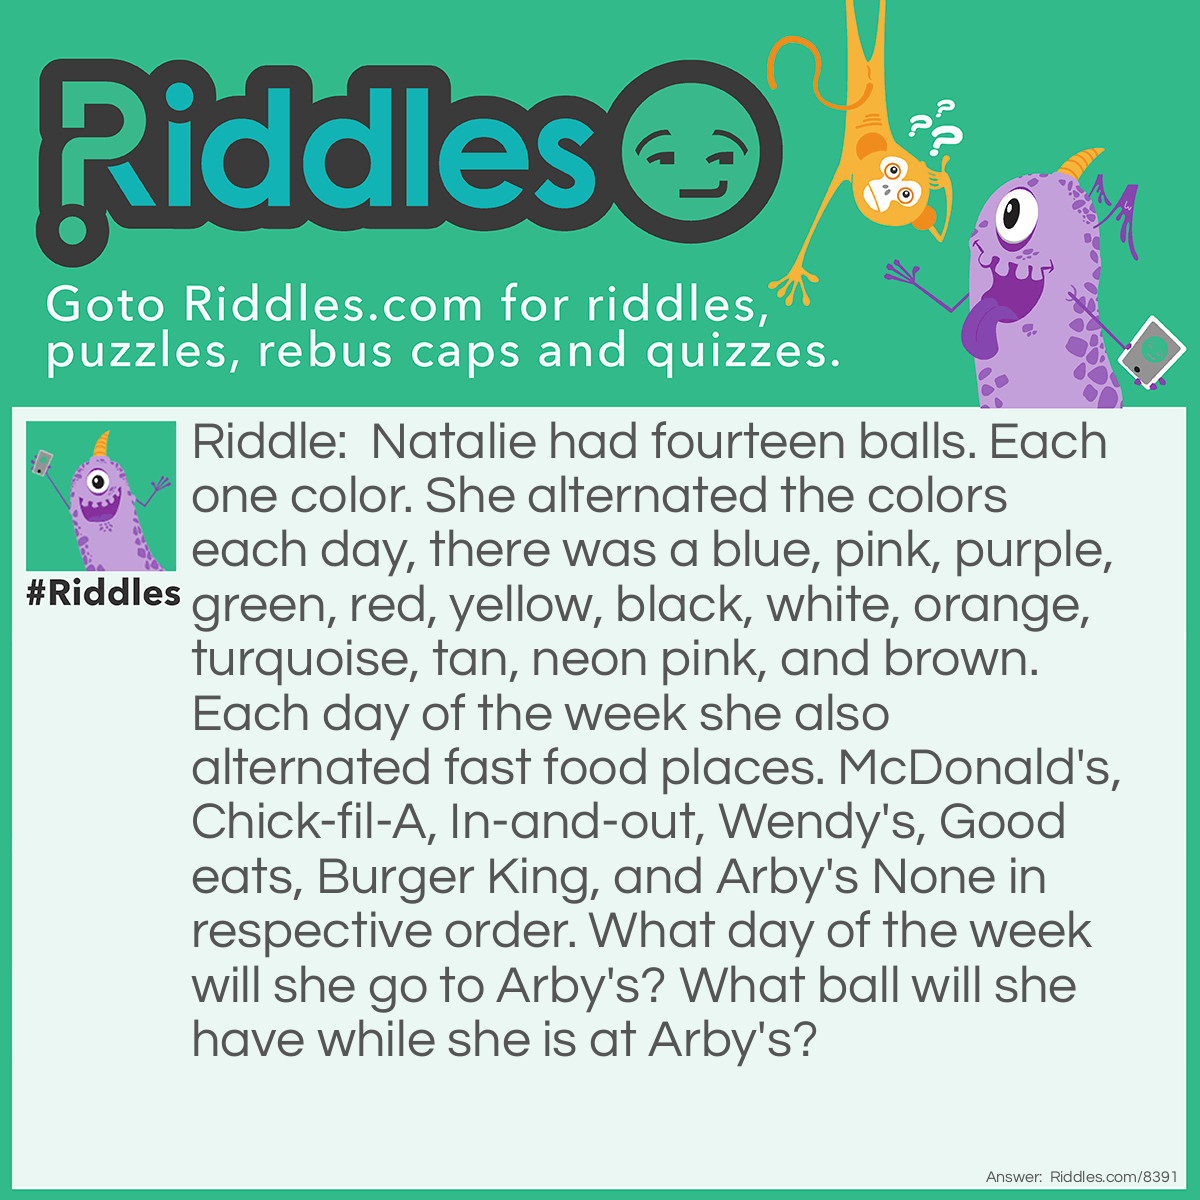 Riddle: Natalie had fourteen balls. Each one color. She alternated the colors each day, there were blue, pink, purple, green, red, yellow, black, white, orange, turquoise, tan, neon pink, and brown. Each day of the week she also alternated fast food places. McDonald's, Chick-fil-A, In-and-out, Wendy's, Good Eats, Burger King, and Arby's None in respective order. What day of the week will she go to Arby's? What ball will she have while she is at Arby's? Answer: She will go to Arby's on Monday, for that is the first day of the week and A is the first letter of the alphabet. So on Tuesday she would go to Burger King. On Wednesday she would go to Chick-fil-A. And so on. She would have a Red Ball On Monday, because red is the first color of the rainbow. So on Tuesday she would have a Orange ball. And so on.